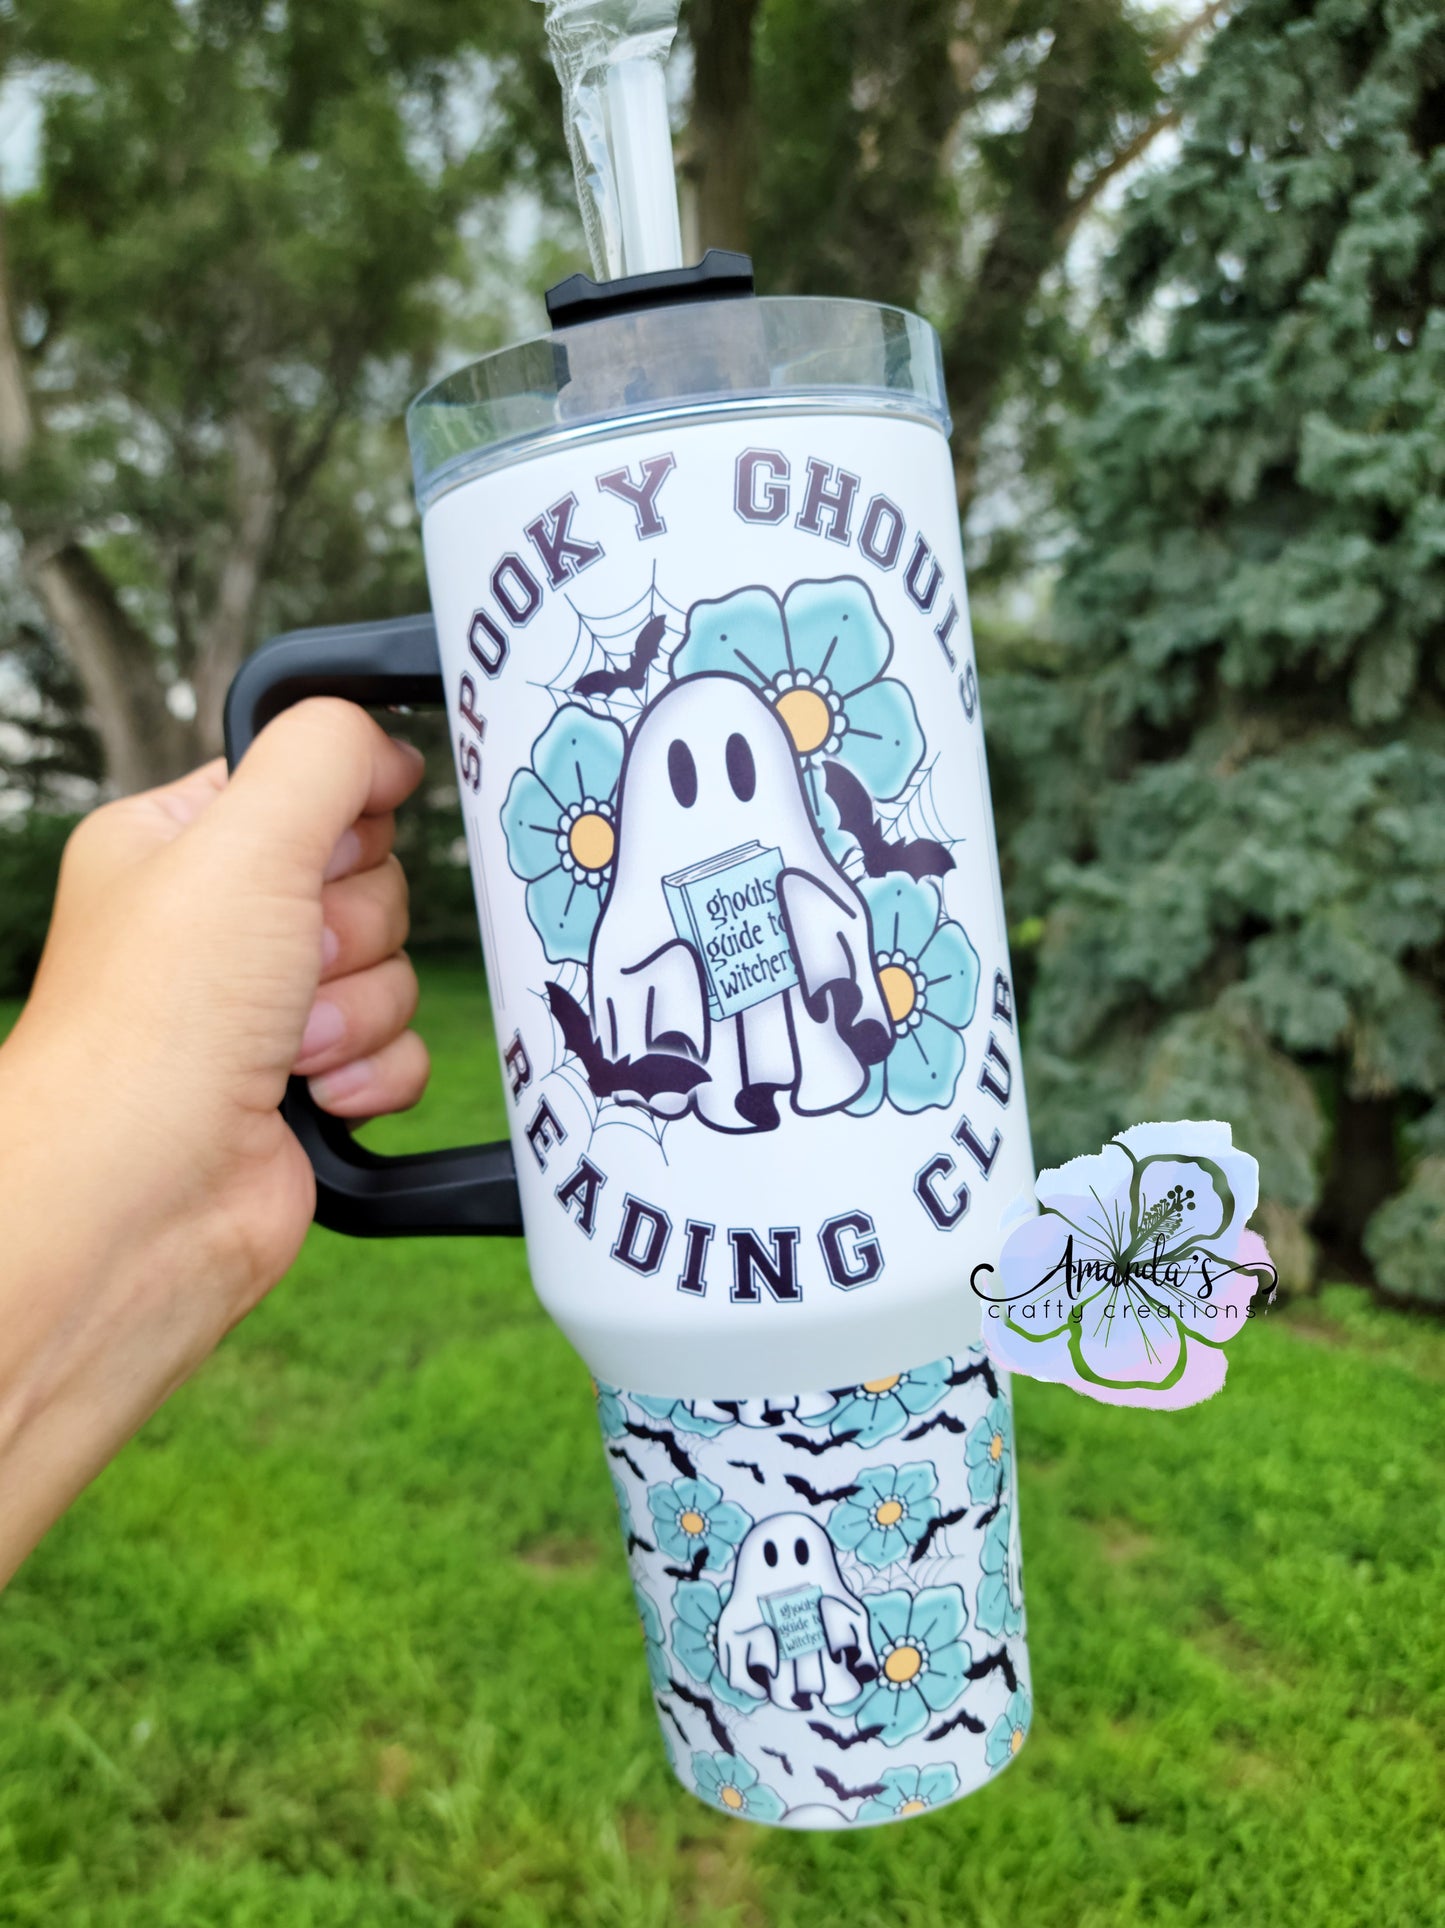 "Spooky Ghouls" 40oz tumbler with handle, Spooky ghouls reading, book lover, spooky lover, ghost, 40 oz metal tumbler with handle, spooky season, metal tumbler with straw